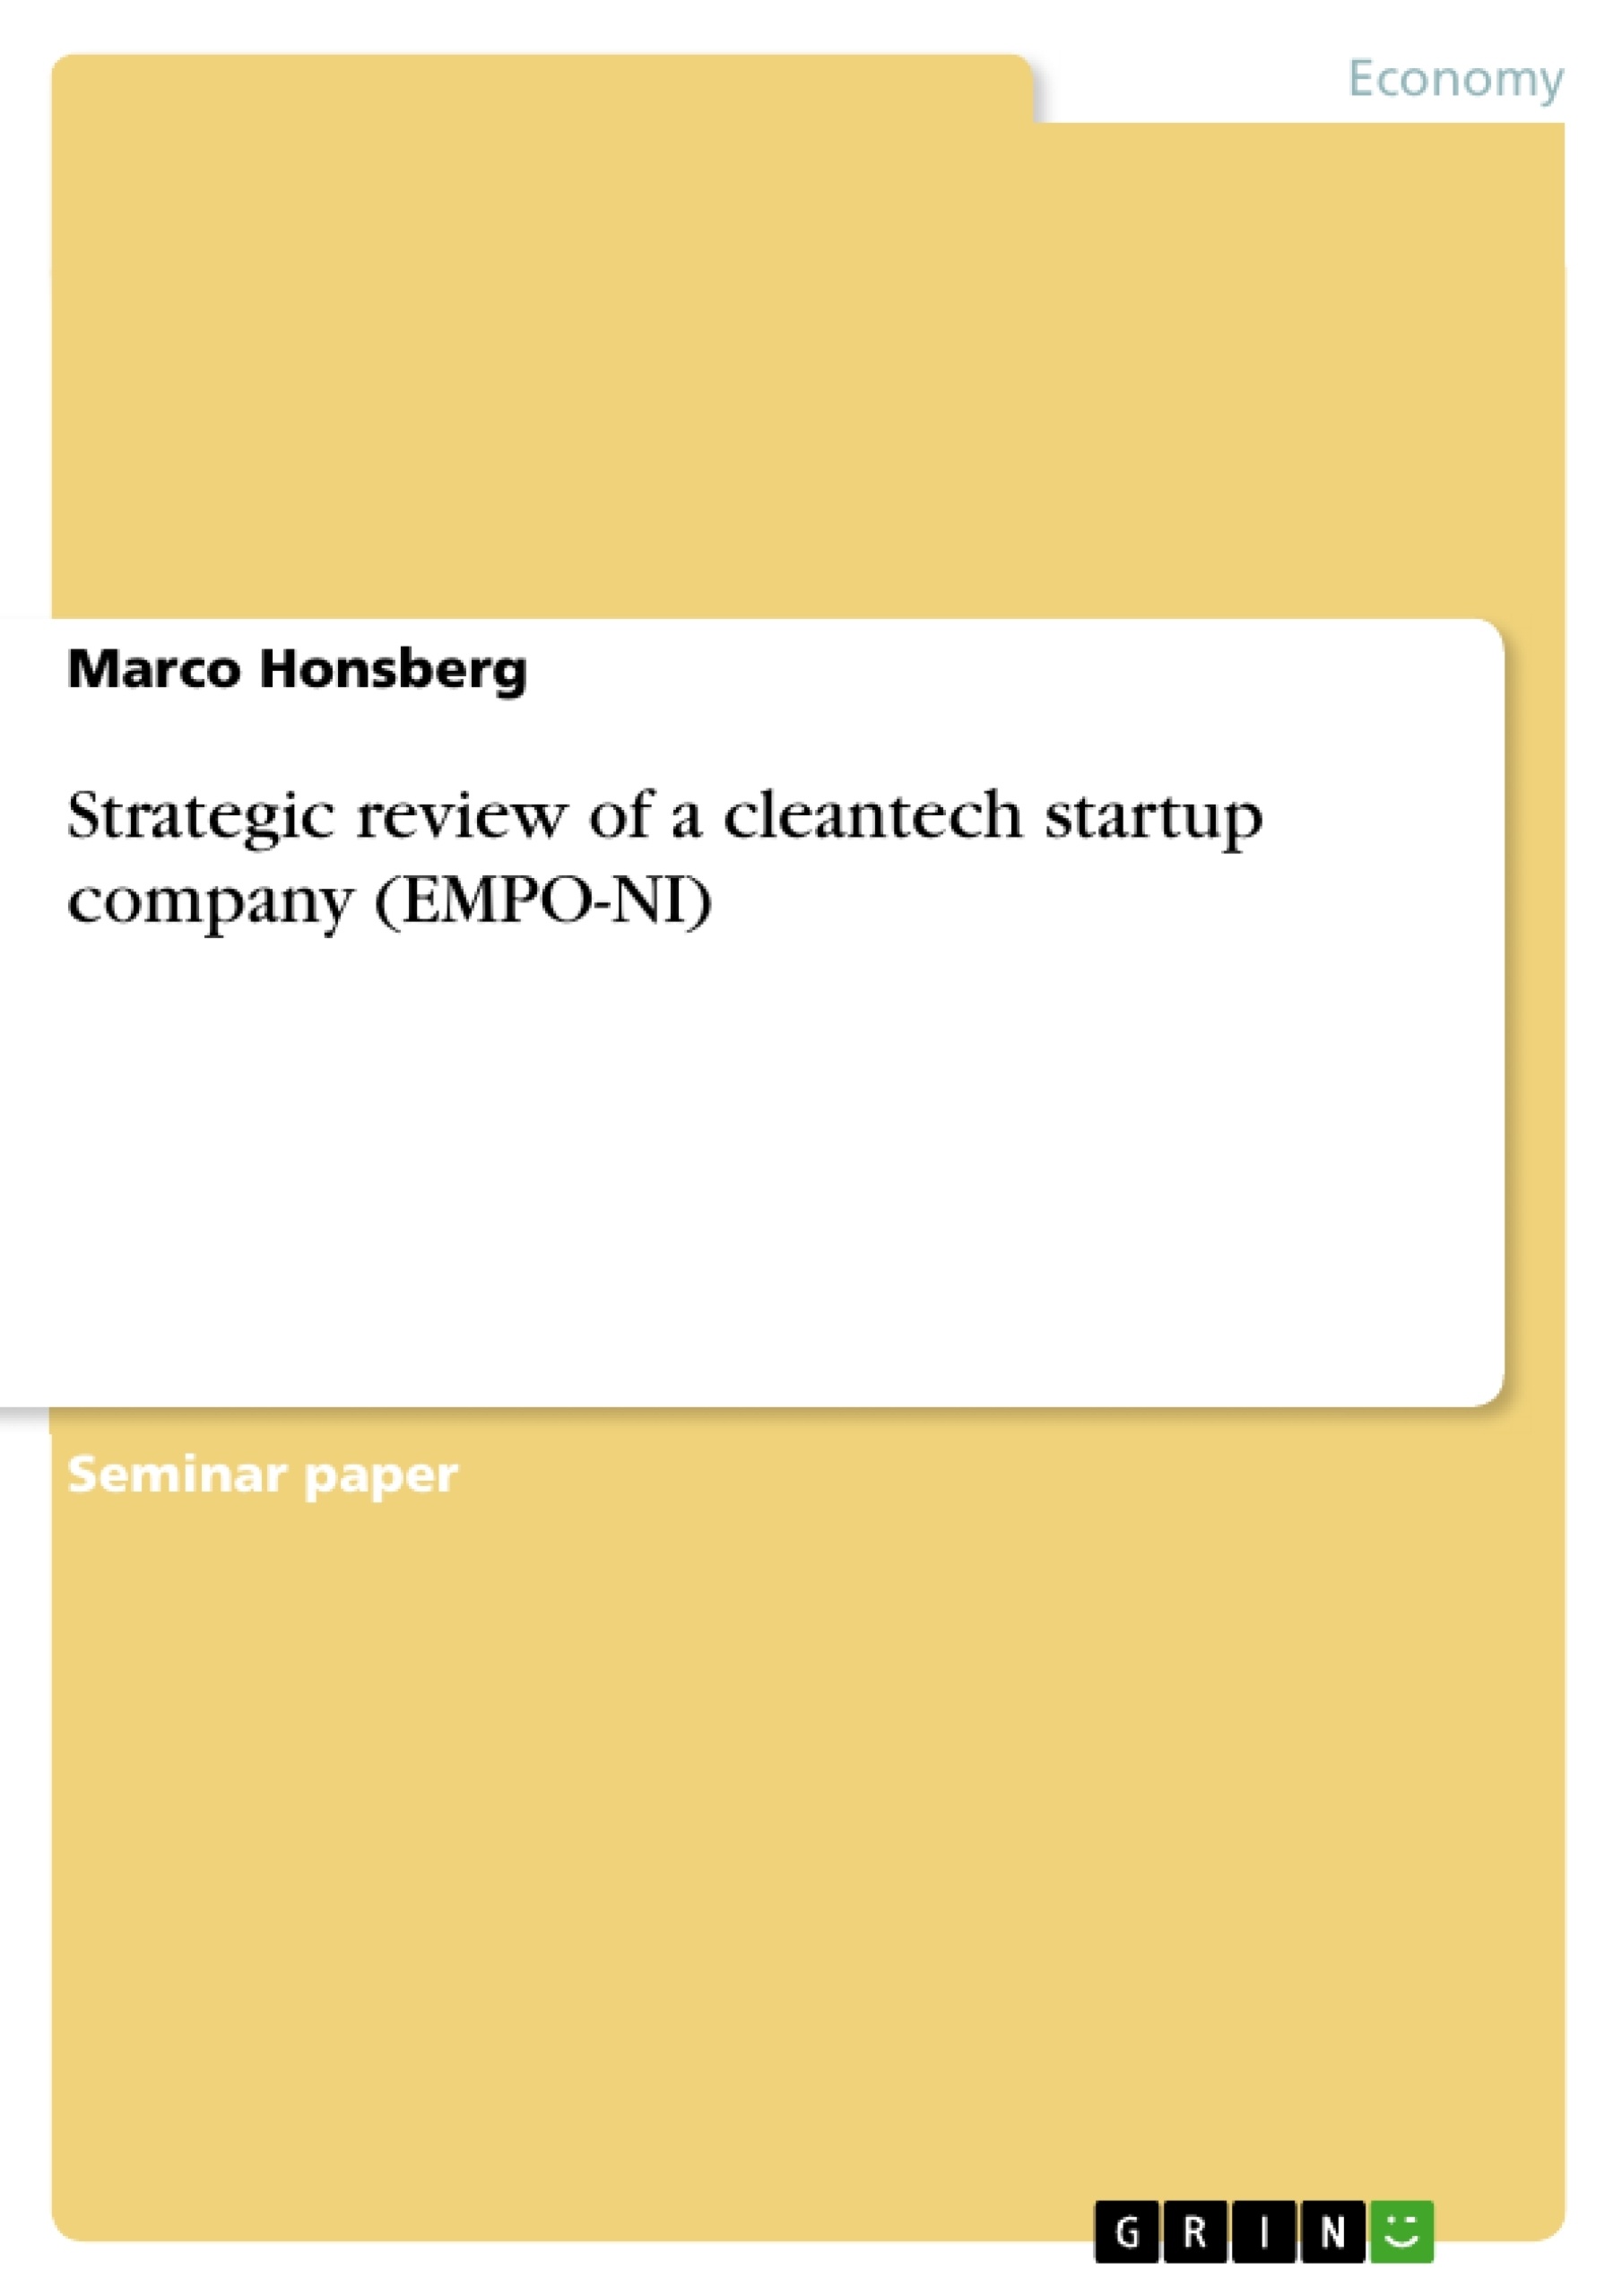 Title: Strategic review of a cleantech startup company (EMPO-NI)